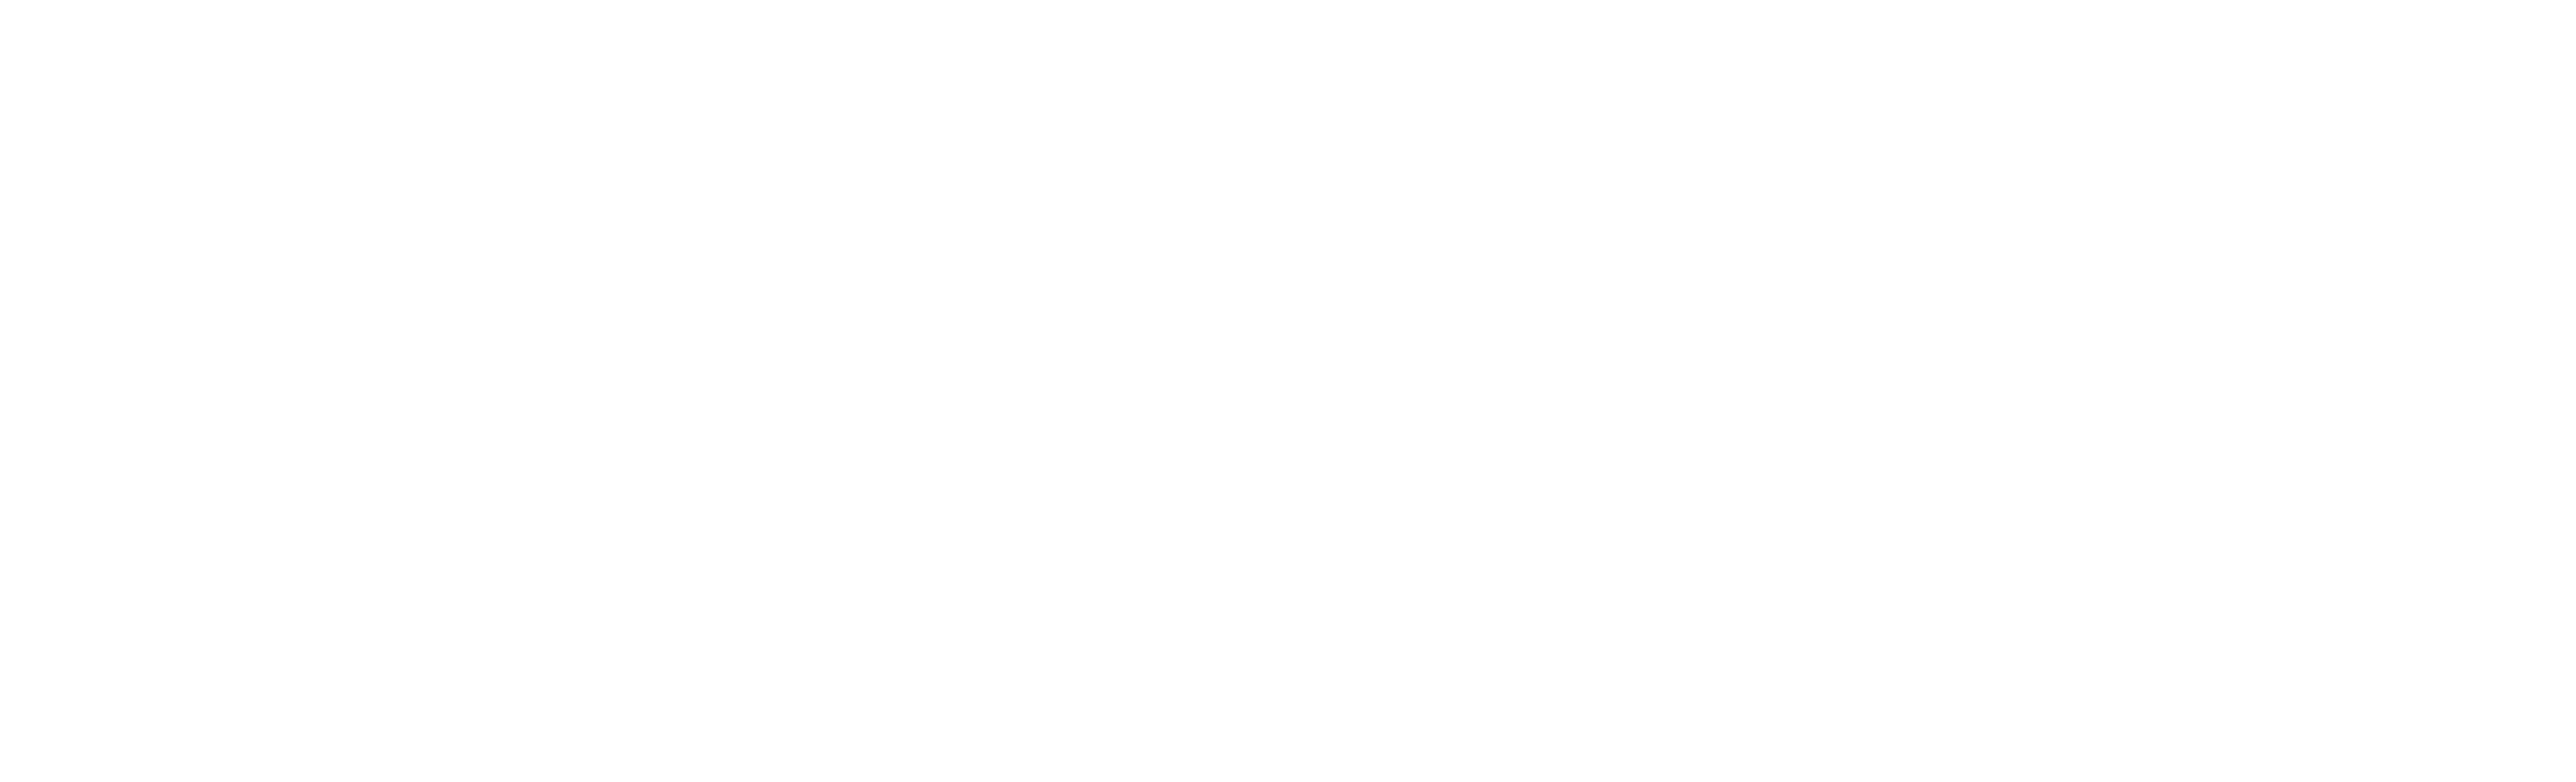 Logo Gucci Picture Free Clipart HQ PNG Image